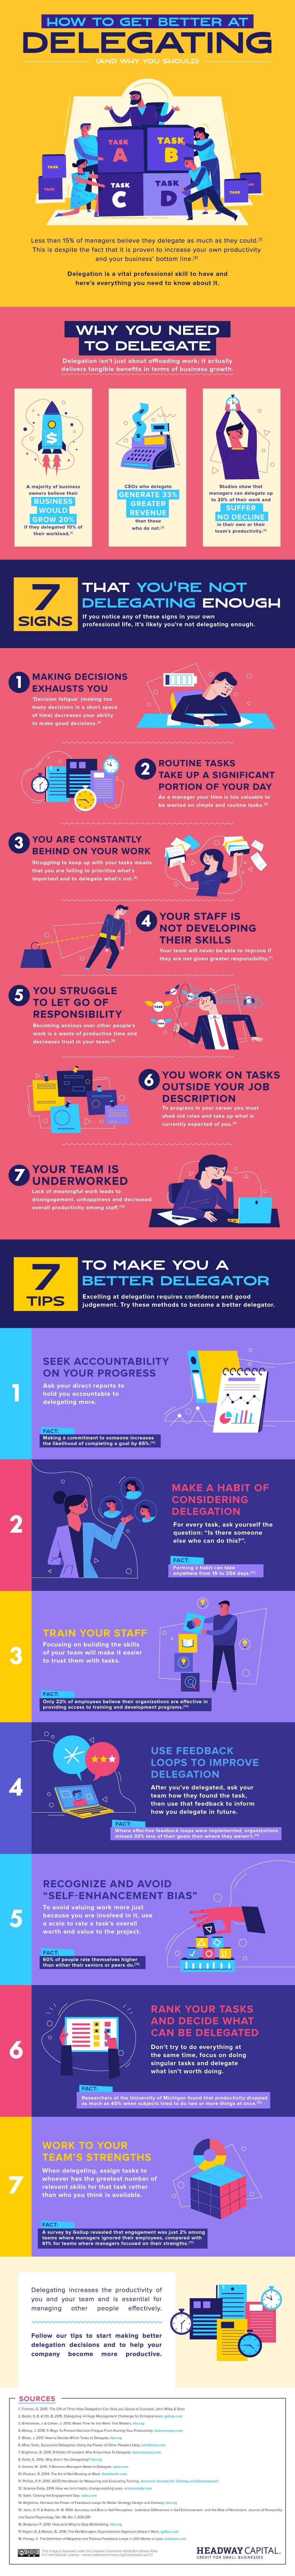 00-how-to-get-better-at-delegating-infographic.jpg